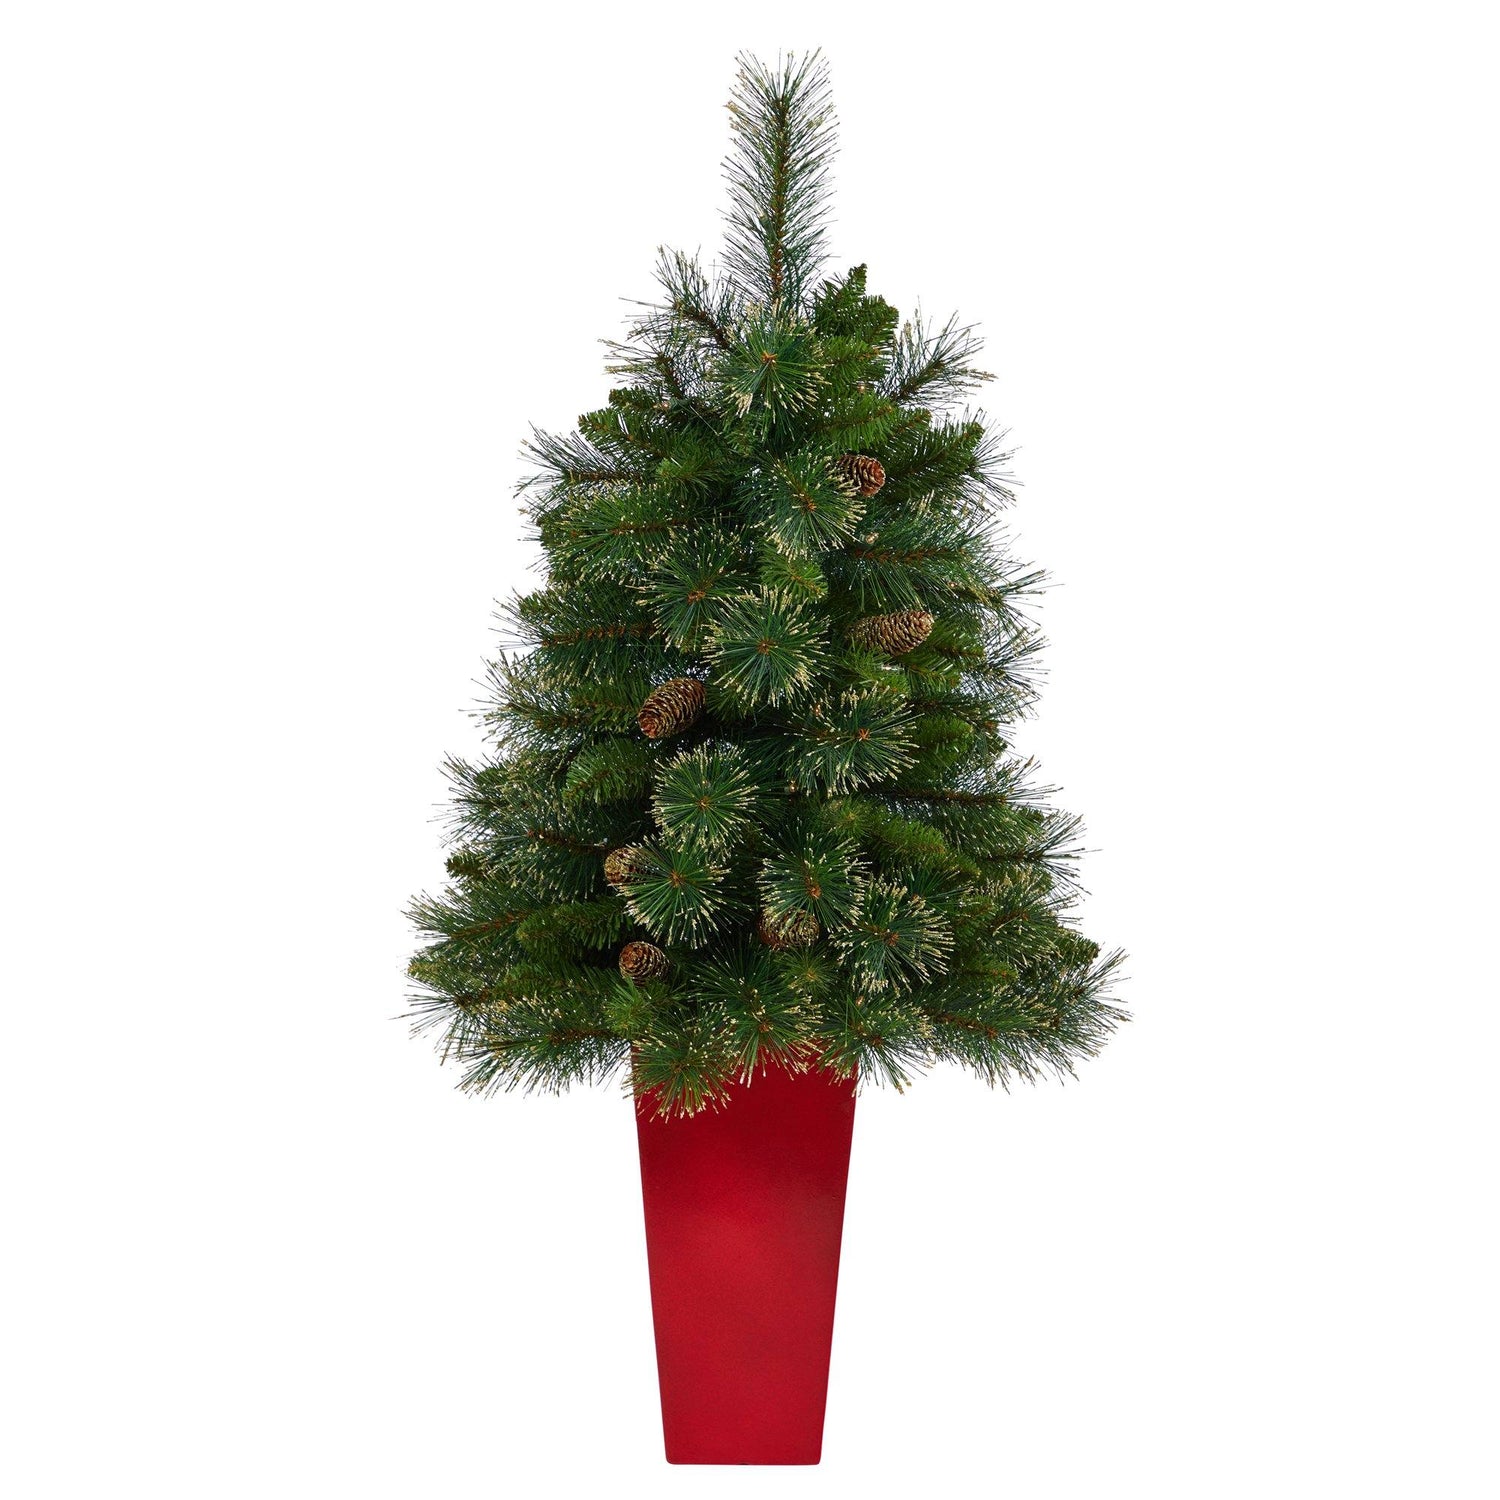 44” Golden Tip Washington Pine Artificial Christmas Tree with 50 Clear Lights, Pine Cones and 148 Bendable Branches in Red Tower Planter